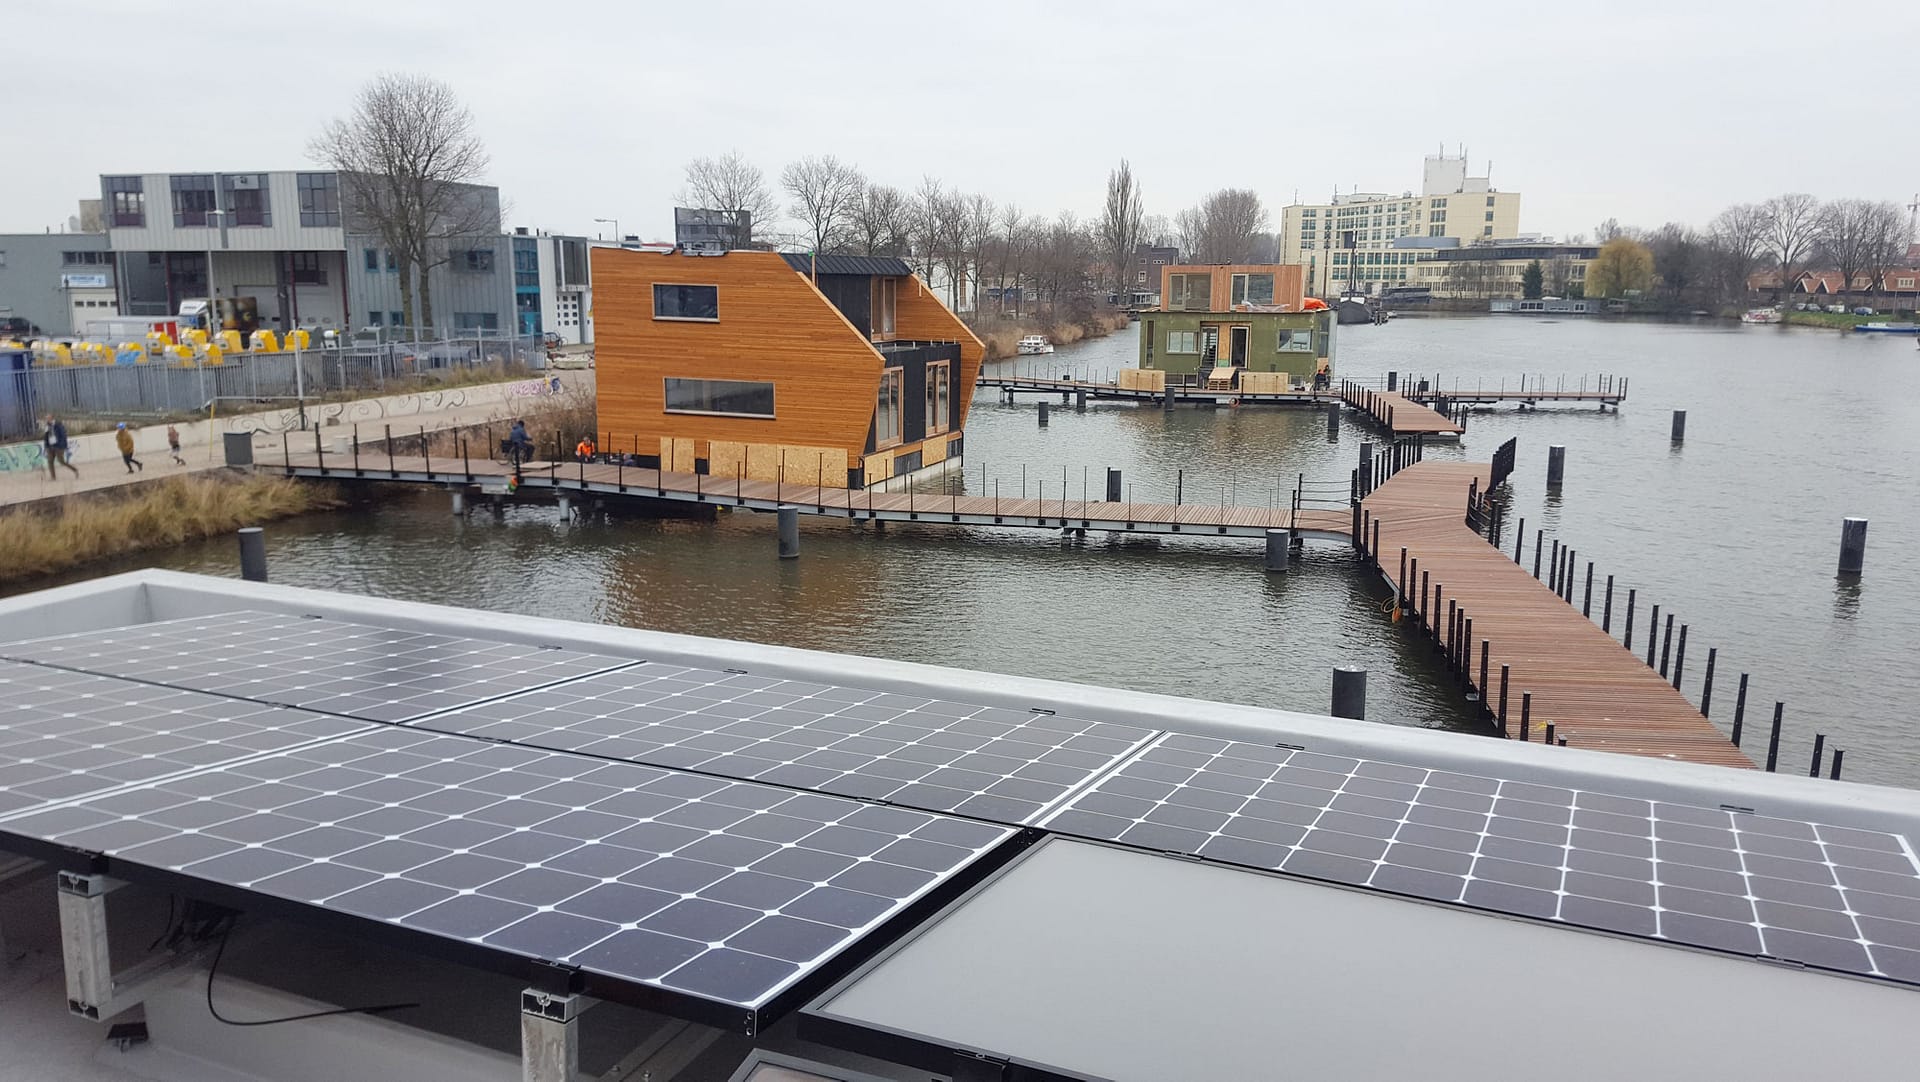 One of the microgrids anaylzed was for the floating community of Schoonschip in Amsterdam.